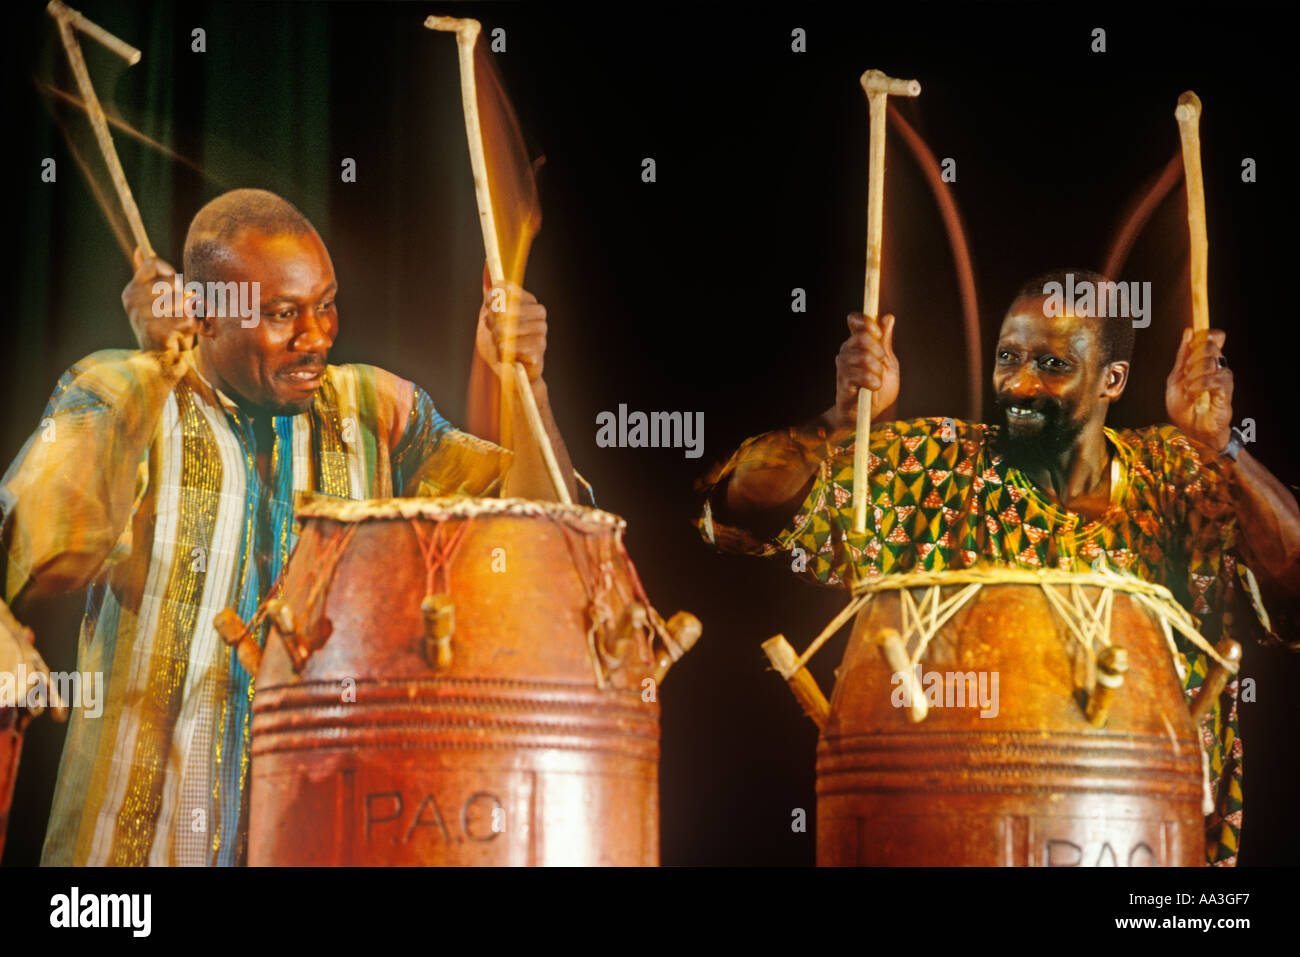 Drummers of the Pan African Orchestra performing in Accra Ghana Stock Photo